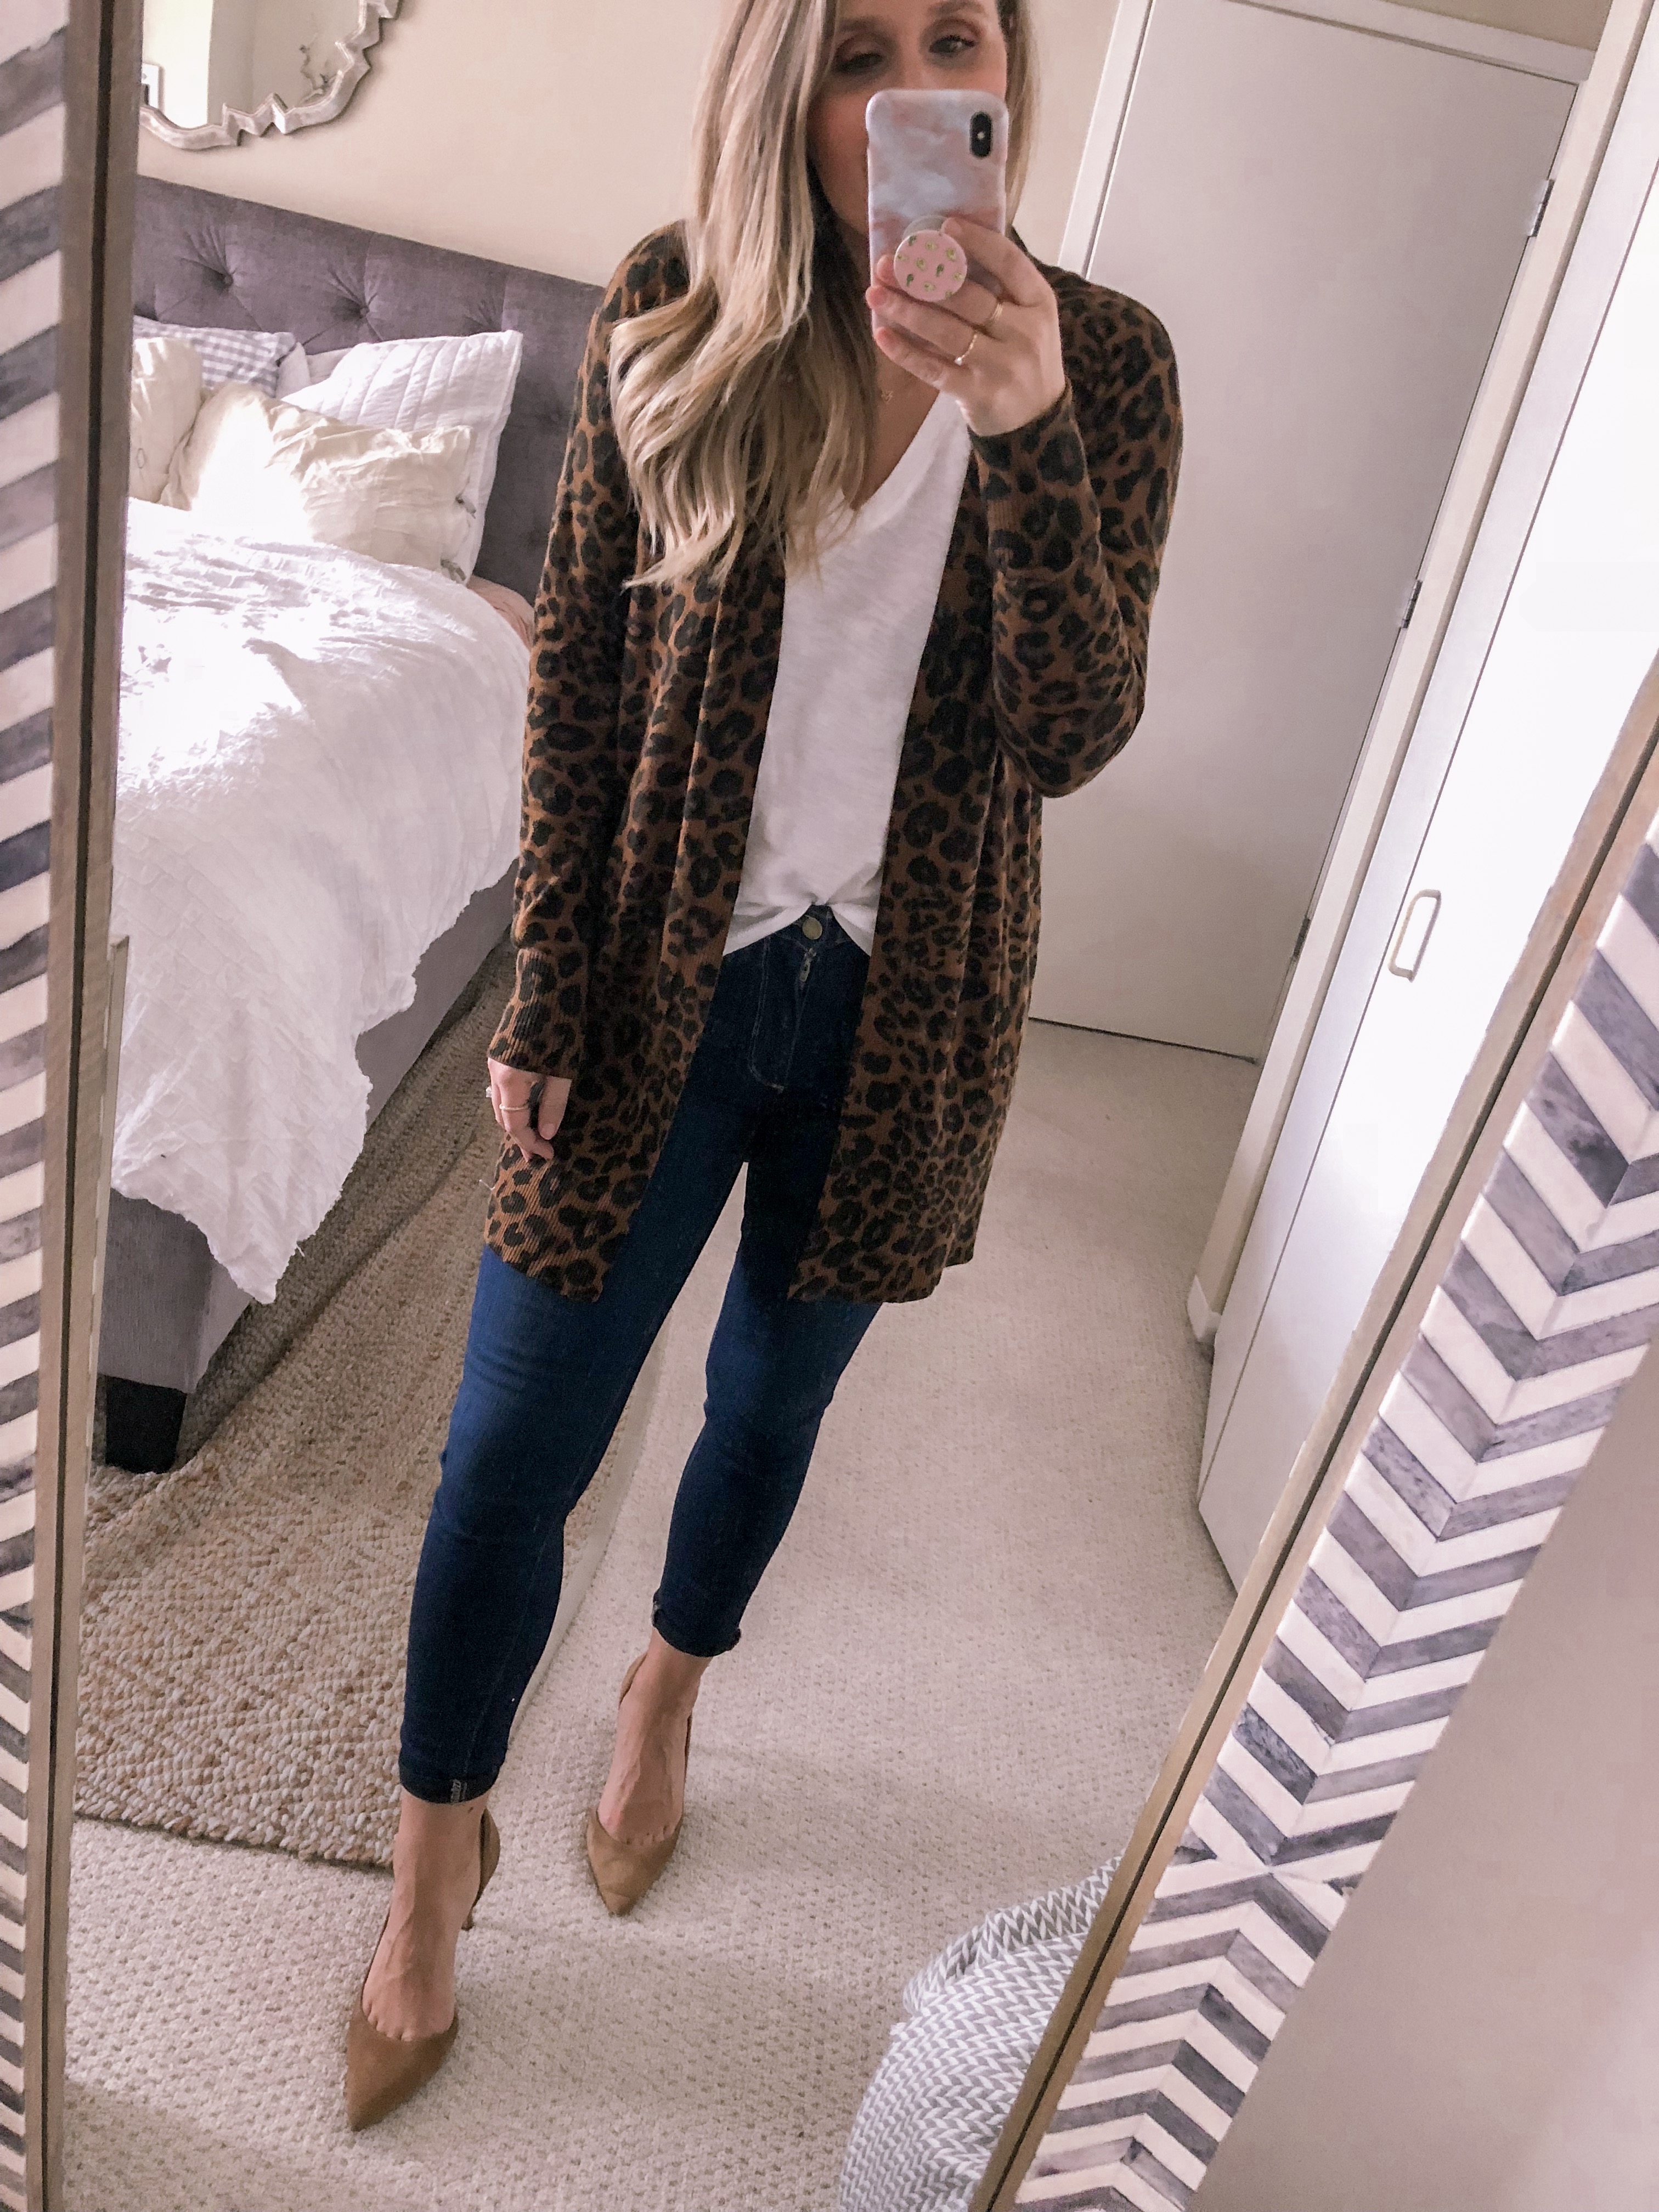 Popular Chicago blogger Visions of Vogue styles a leopard cardigan with the Madewell Whisper tee and beige pumps for a fall office outfit look.